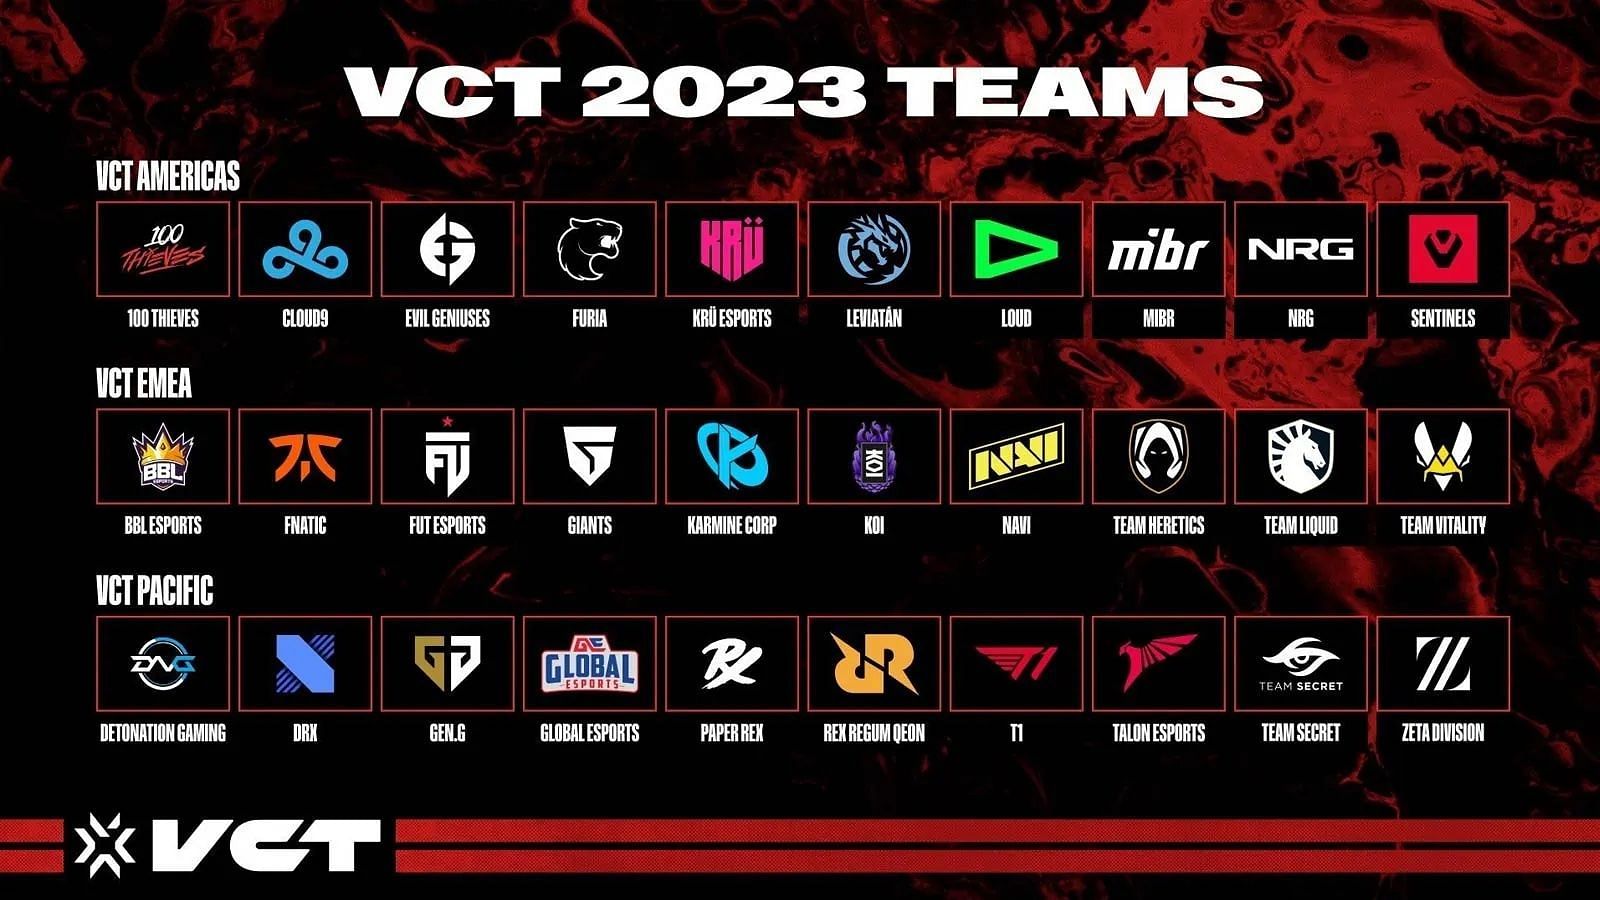 VCT Americas partner teams are set to battle for glory (Image via Riot Games)